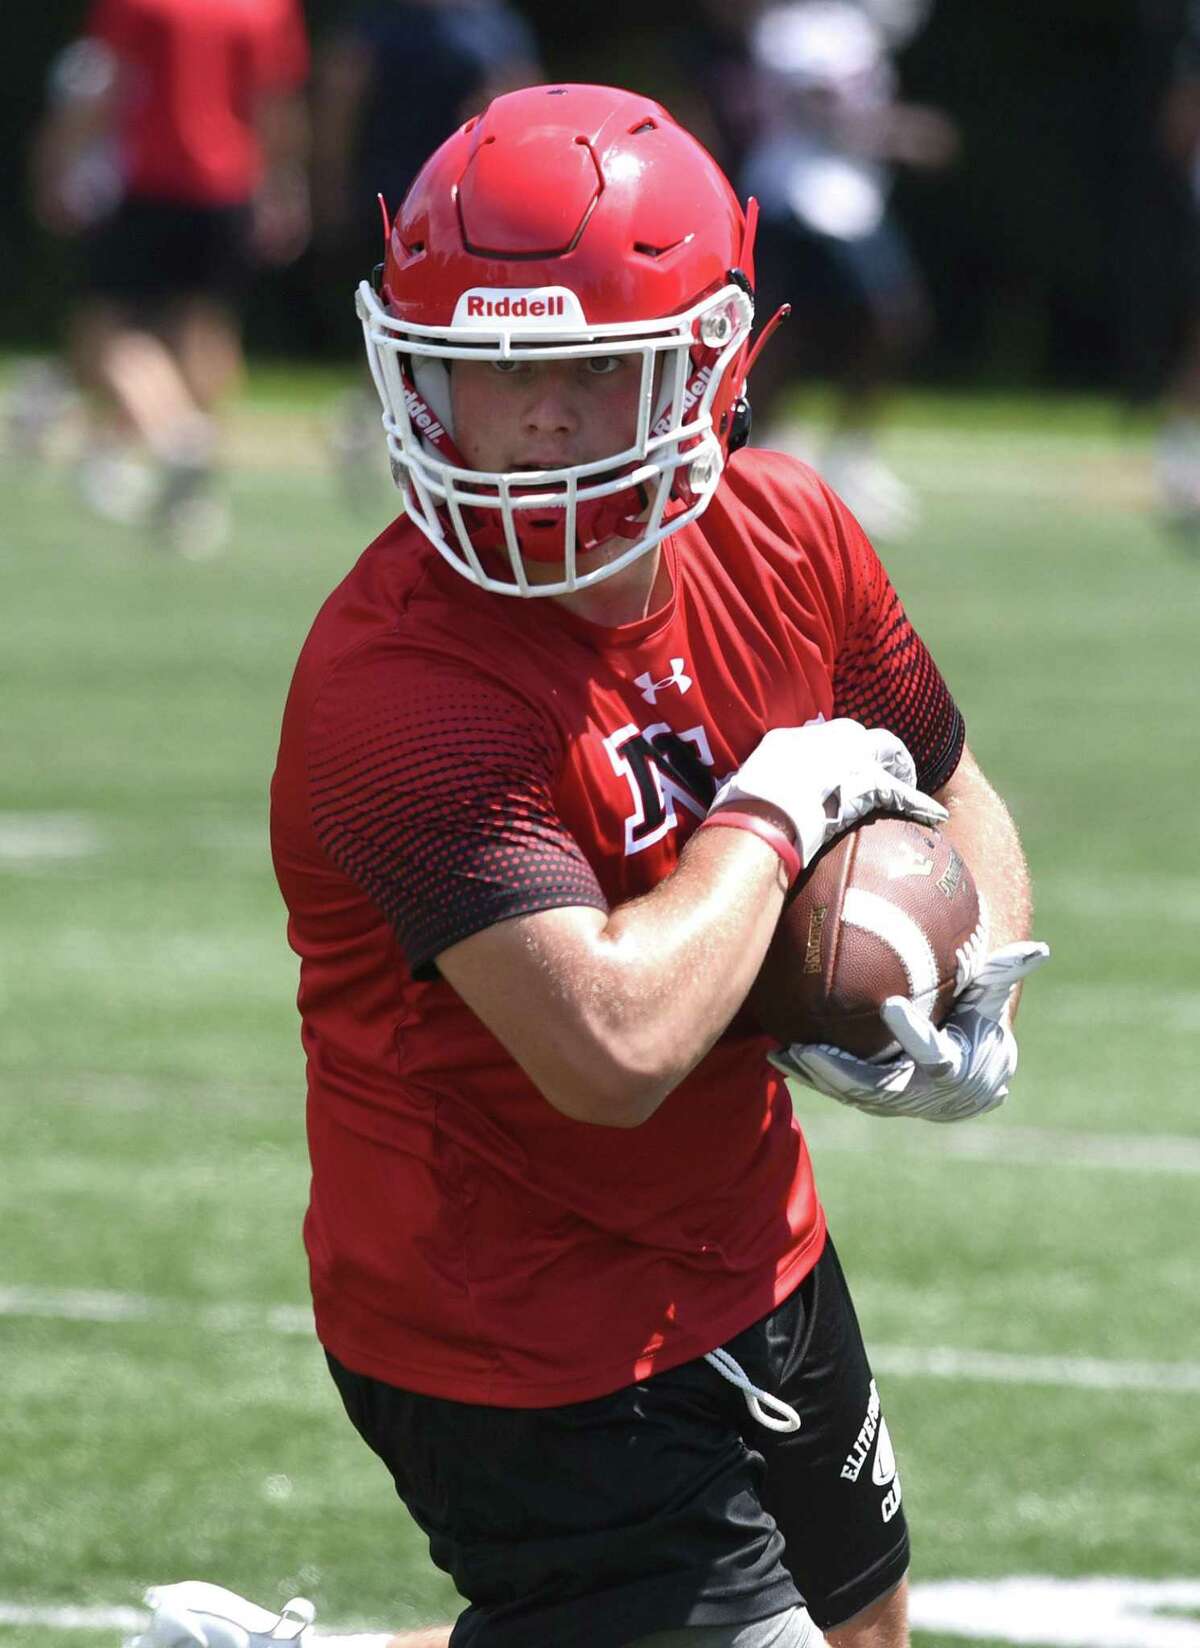 New Canaan's Vin Cognetta turns to run after a reception during day one of the Grip It and Rip It football tournament in New Canaan on Friday, July 9, 2021.